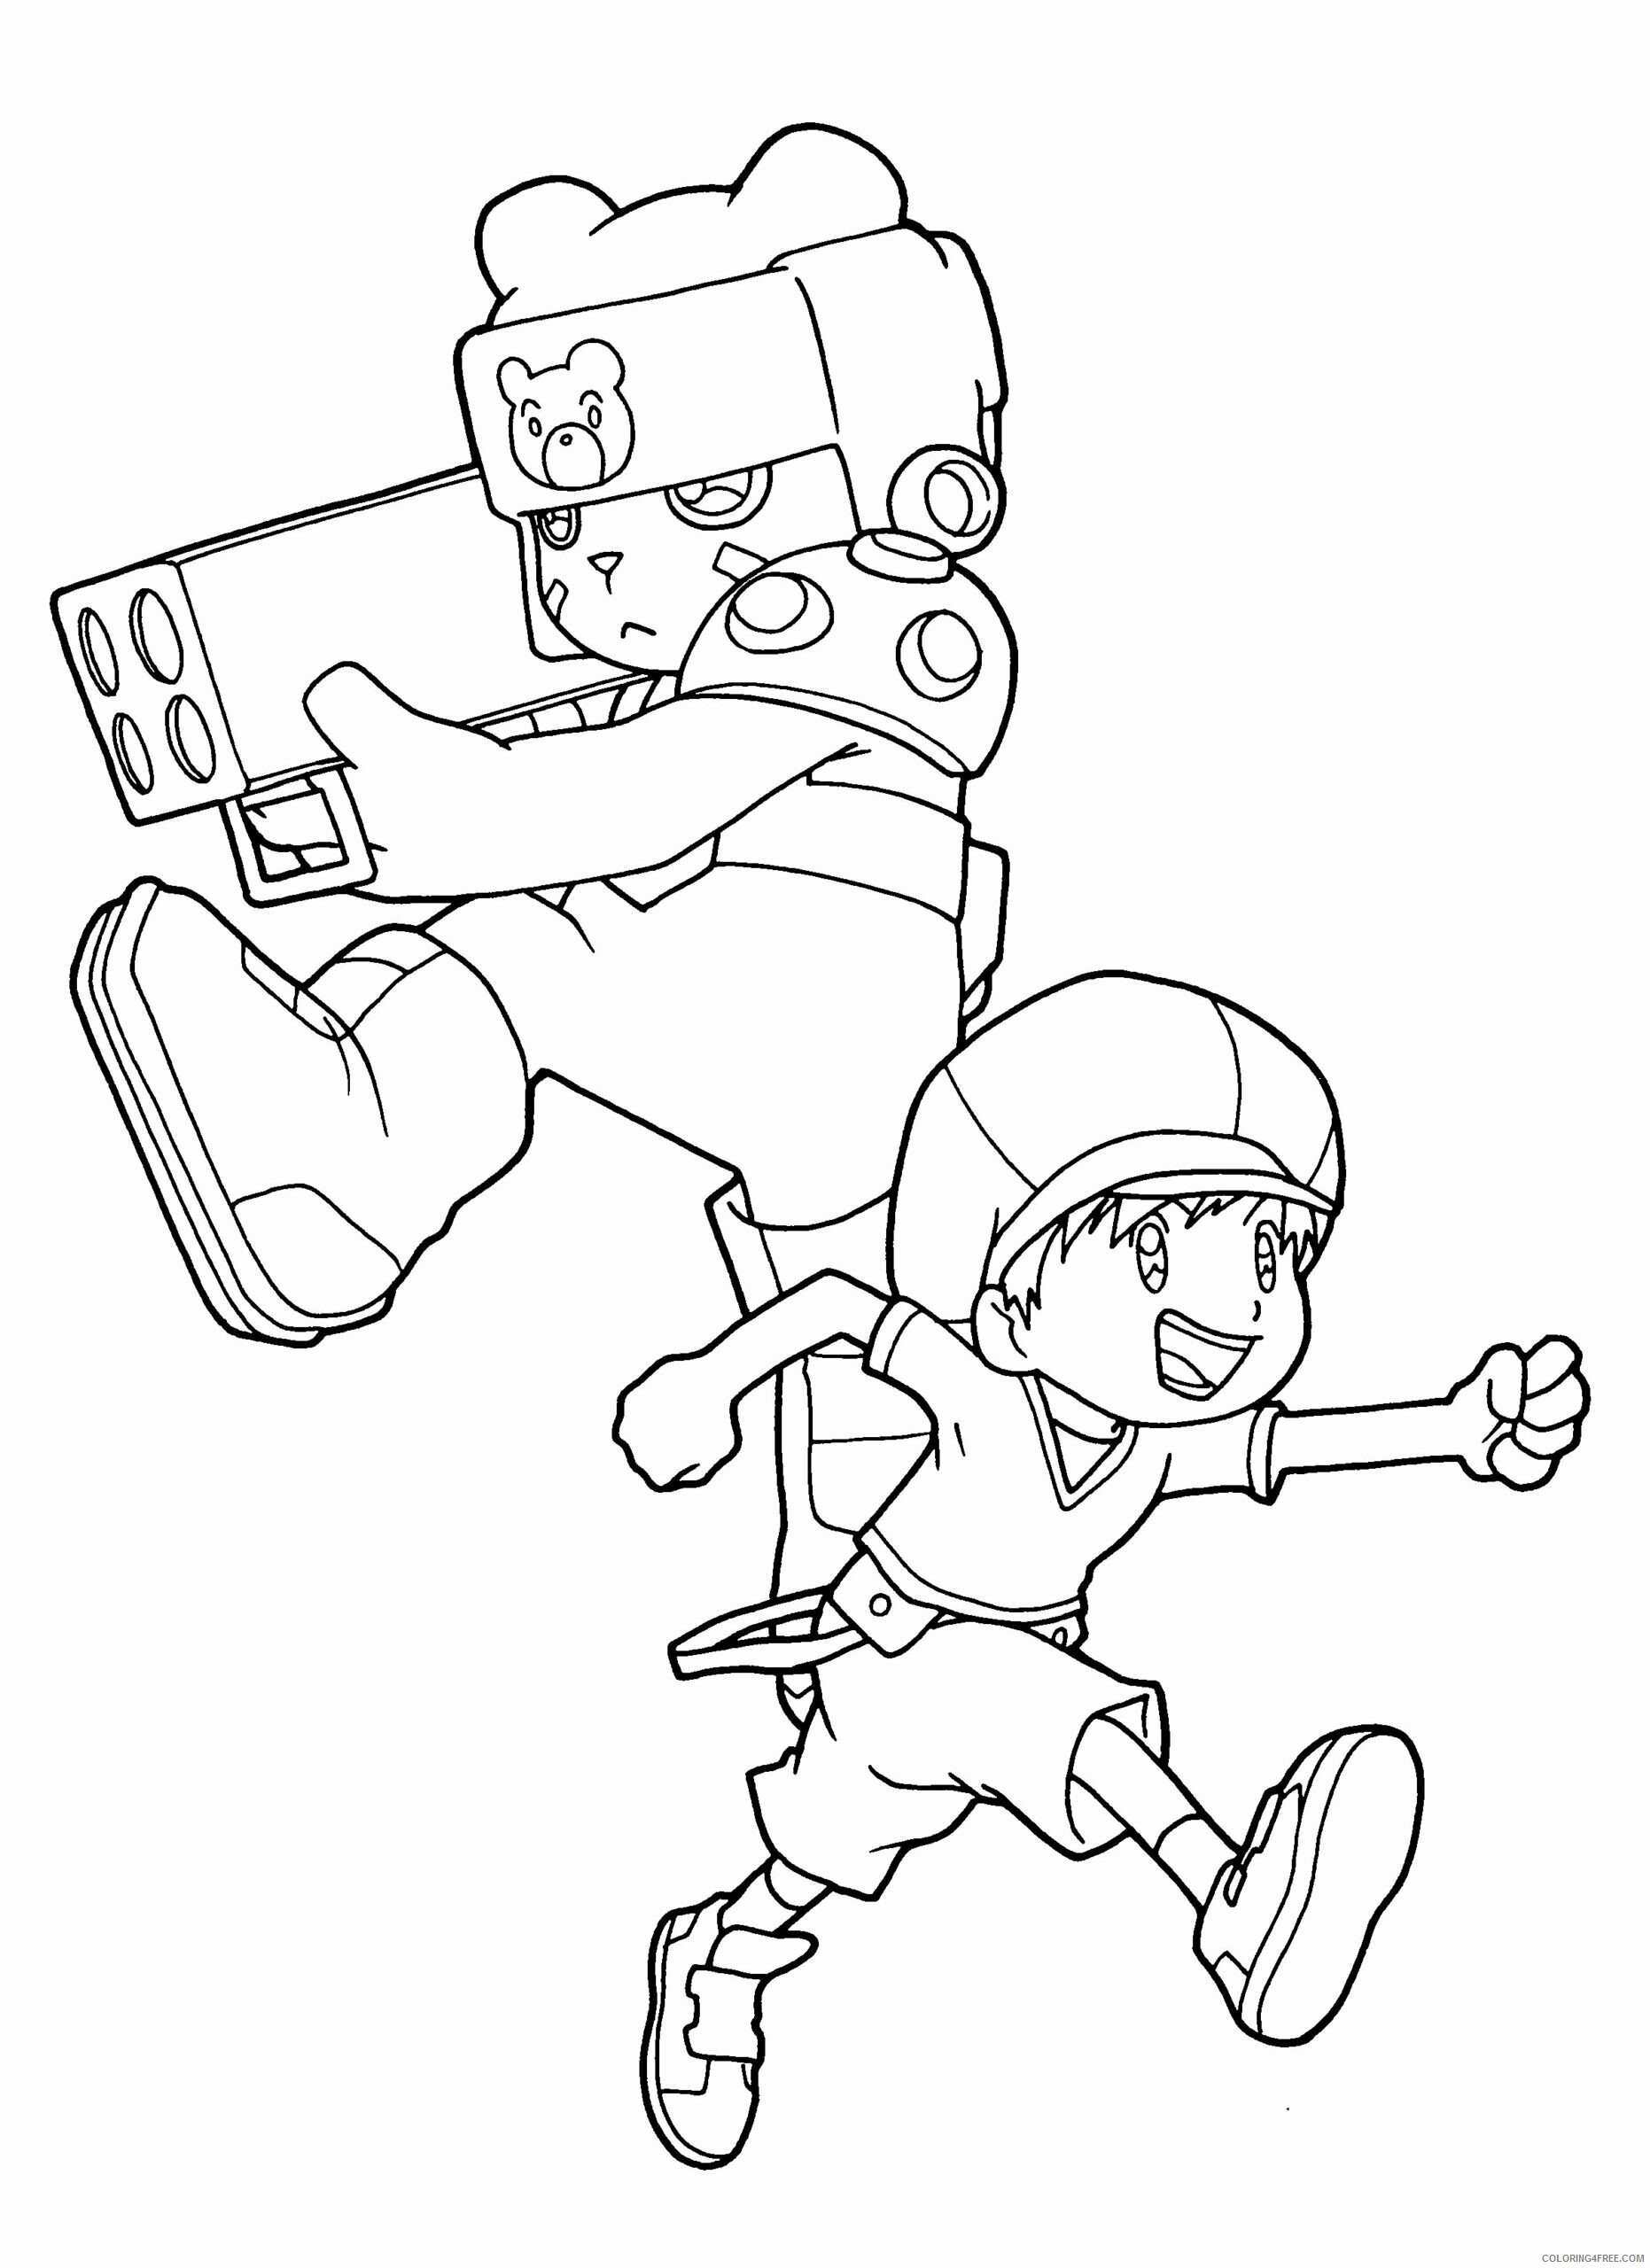 Digimon Printable Coloring Pages Anime digimon 69 2021 0364 Coloring4free